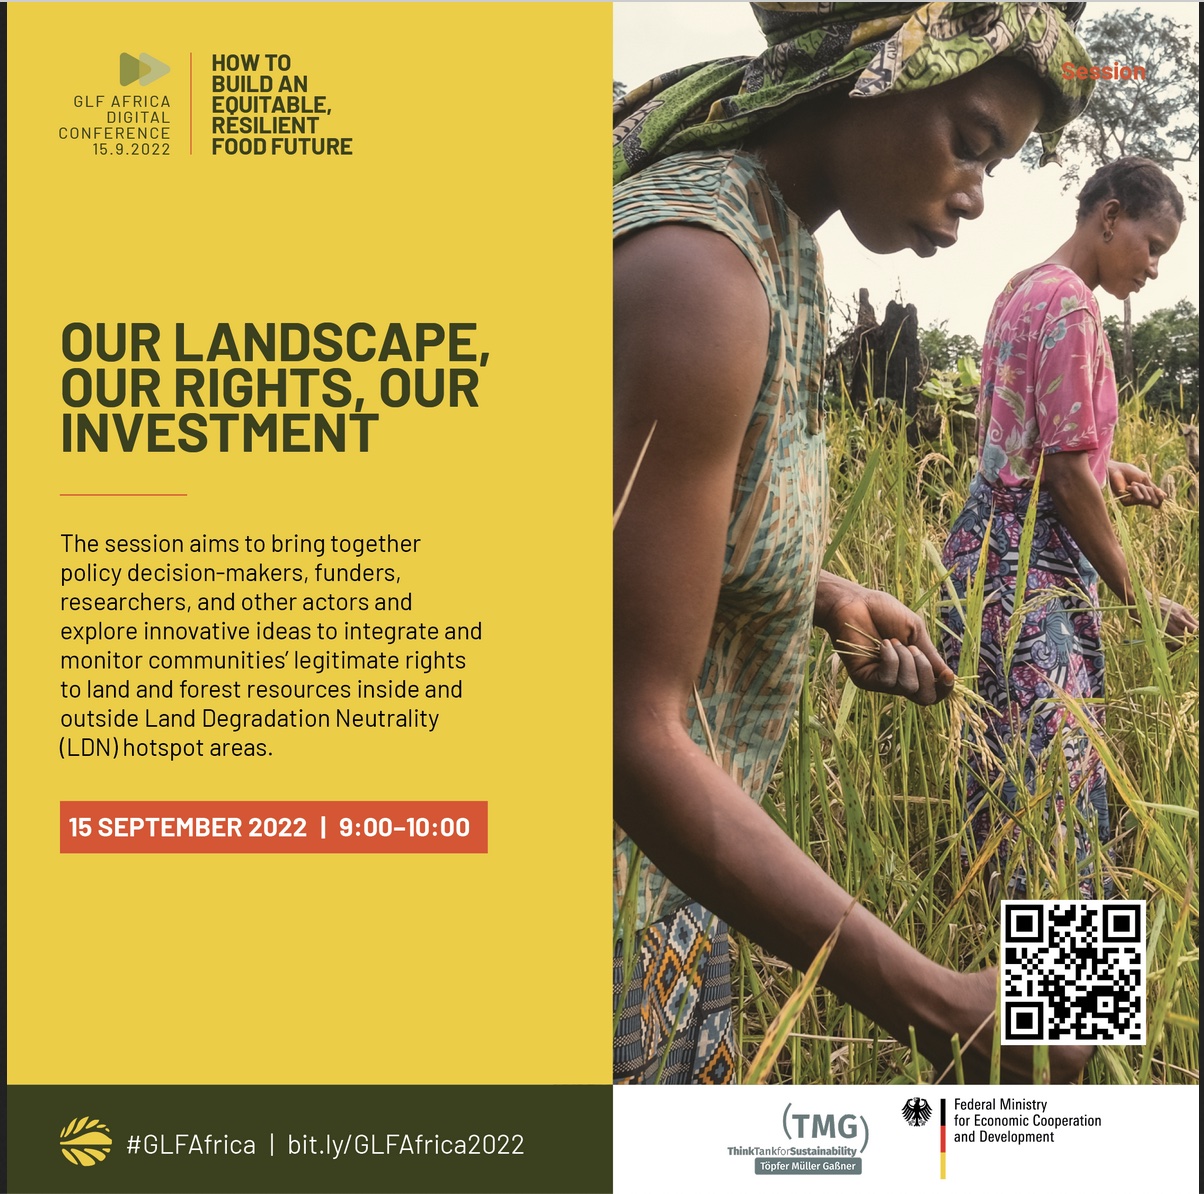 Our landscape, our rights, our investment